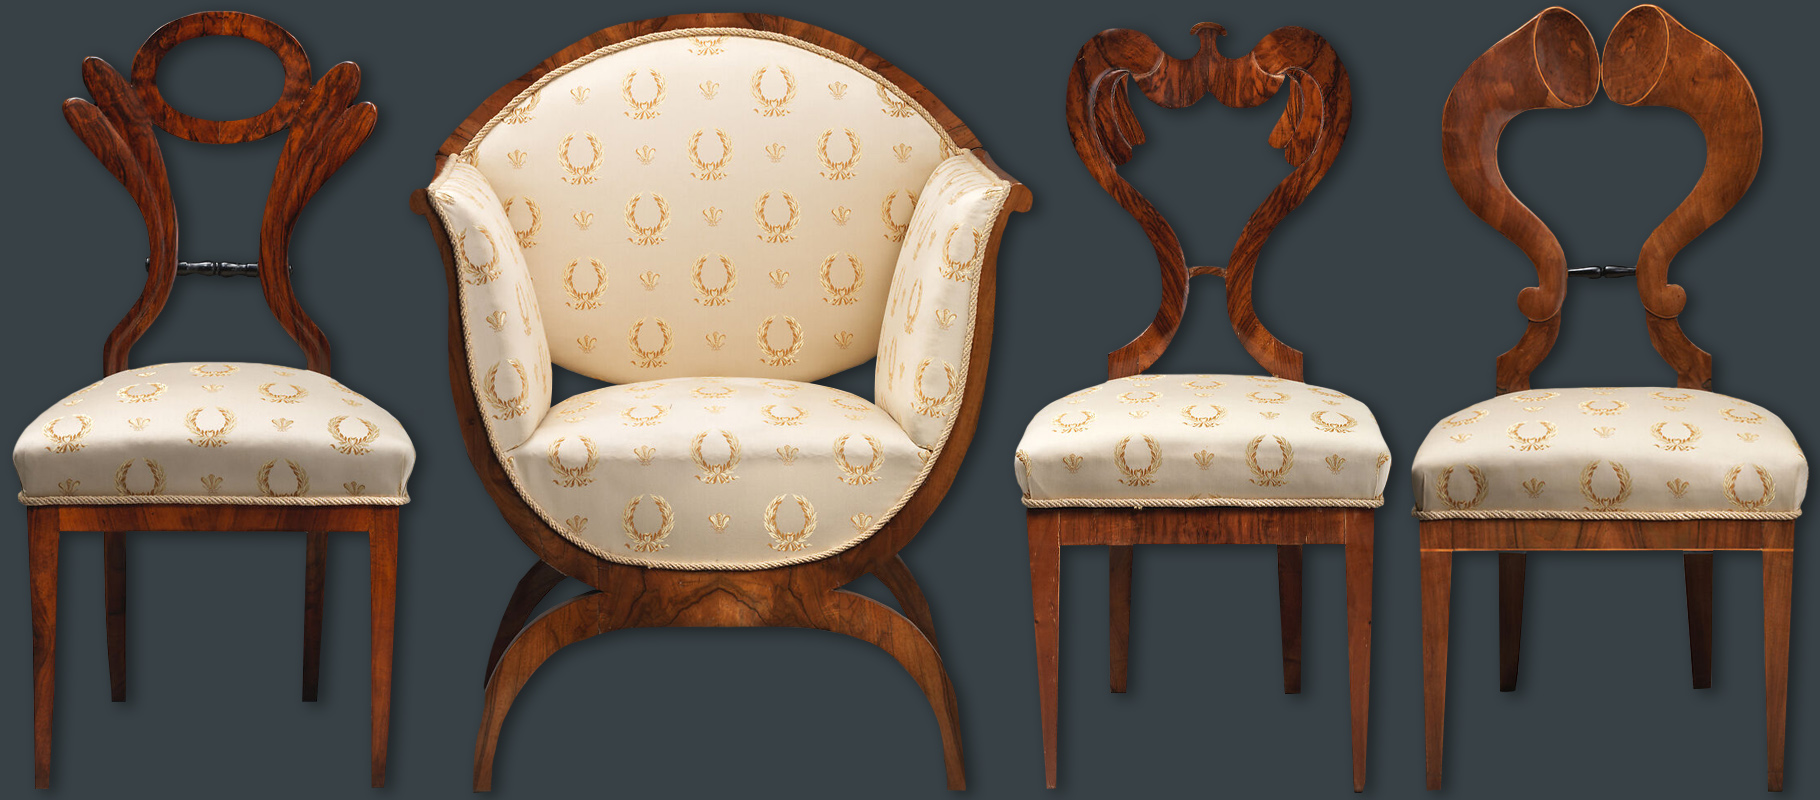 neoclassical chairs 1830s